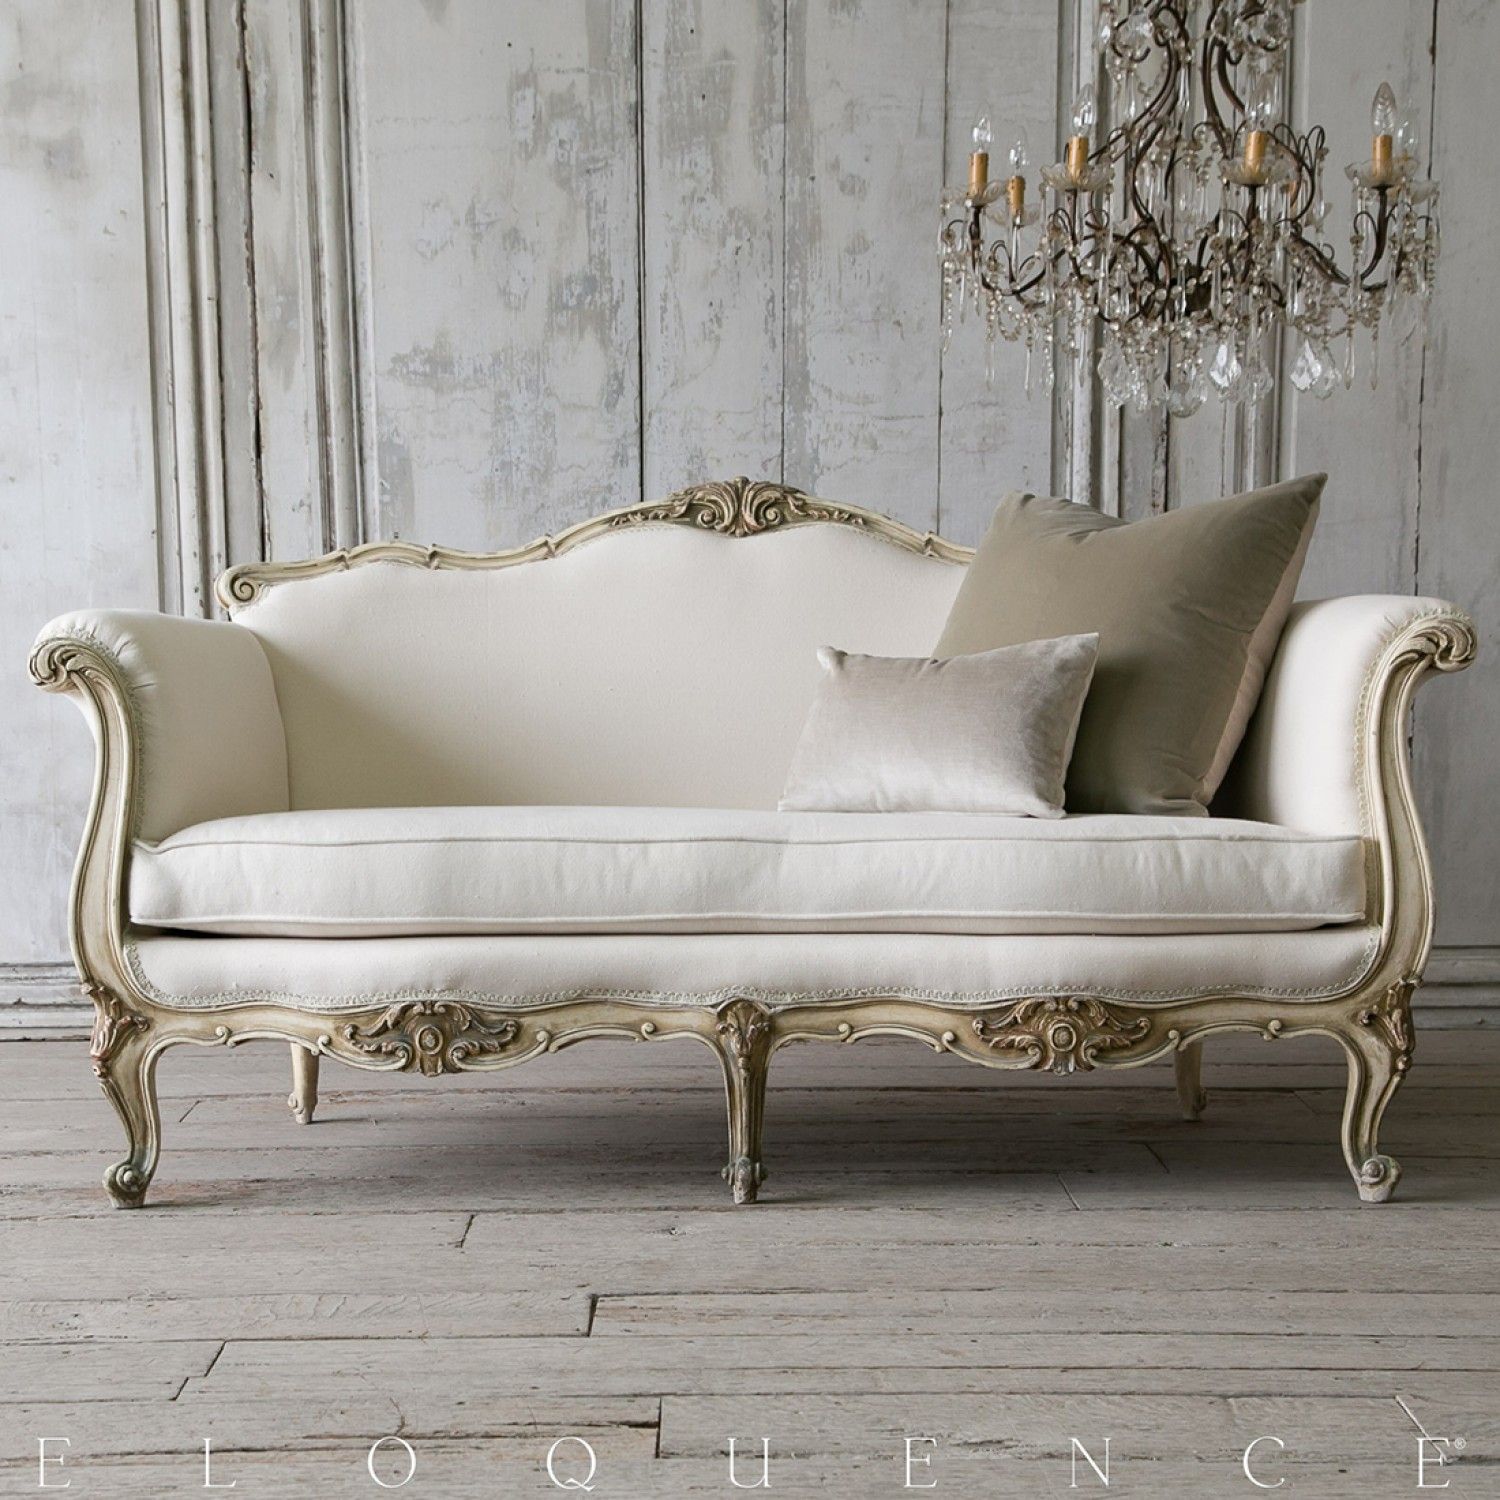 Timeless Elegance: The Timeless Appeal of Classic Sofas